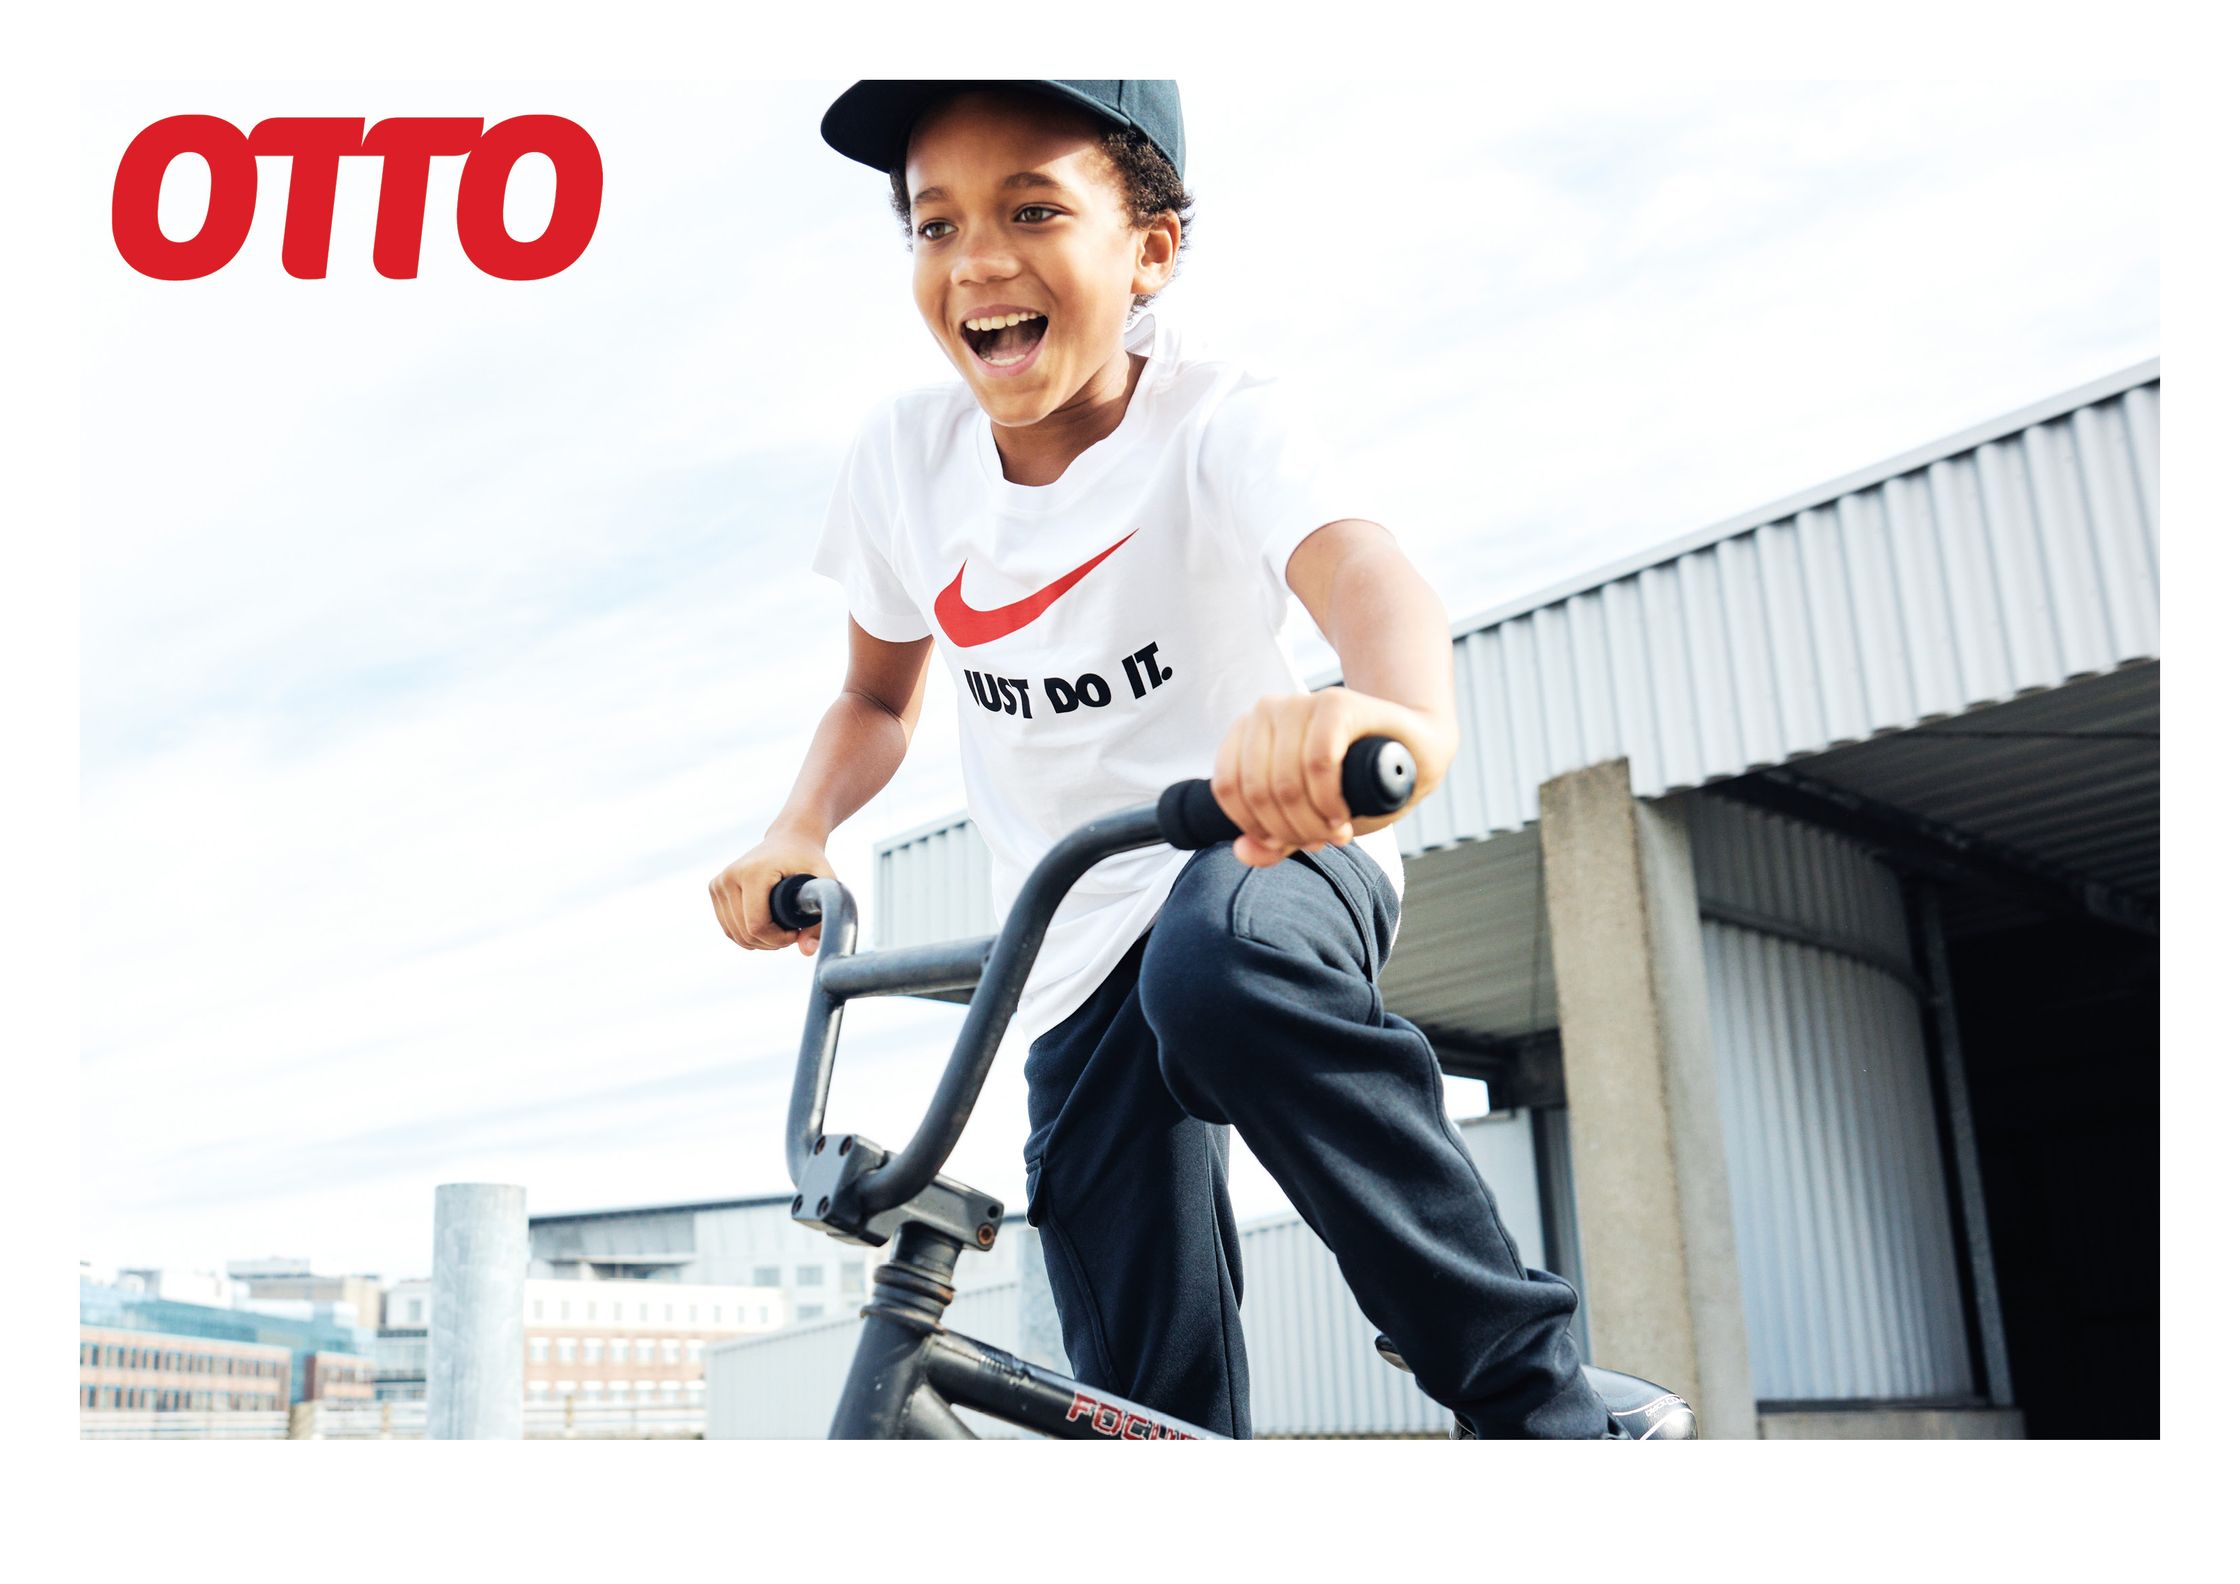 a young boy riding a bike with the words otto